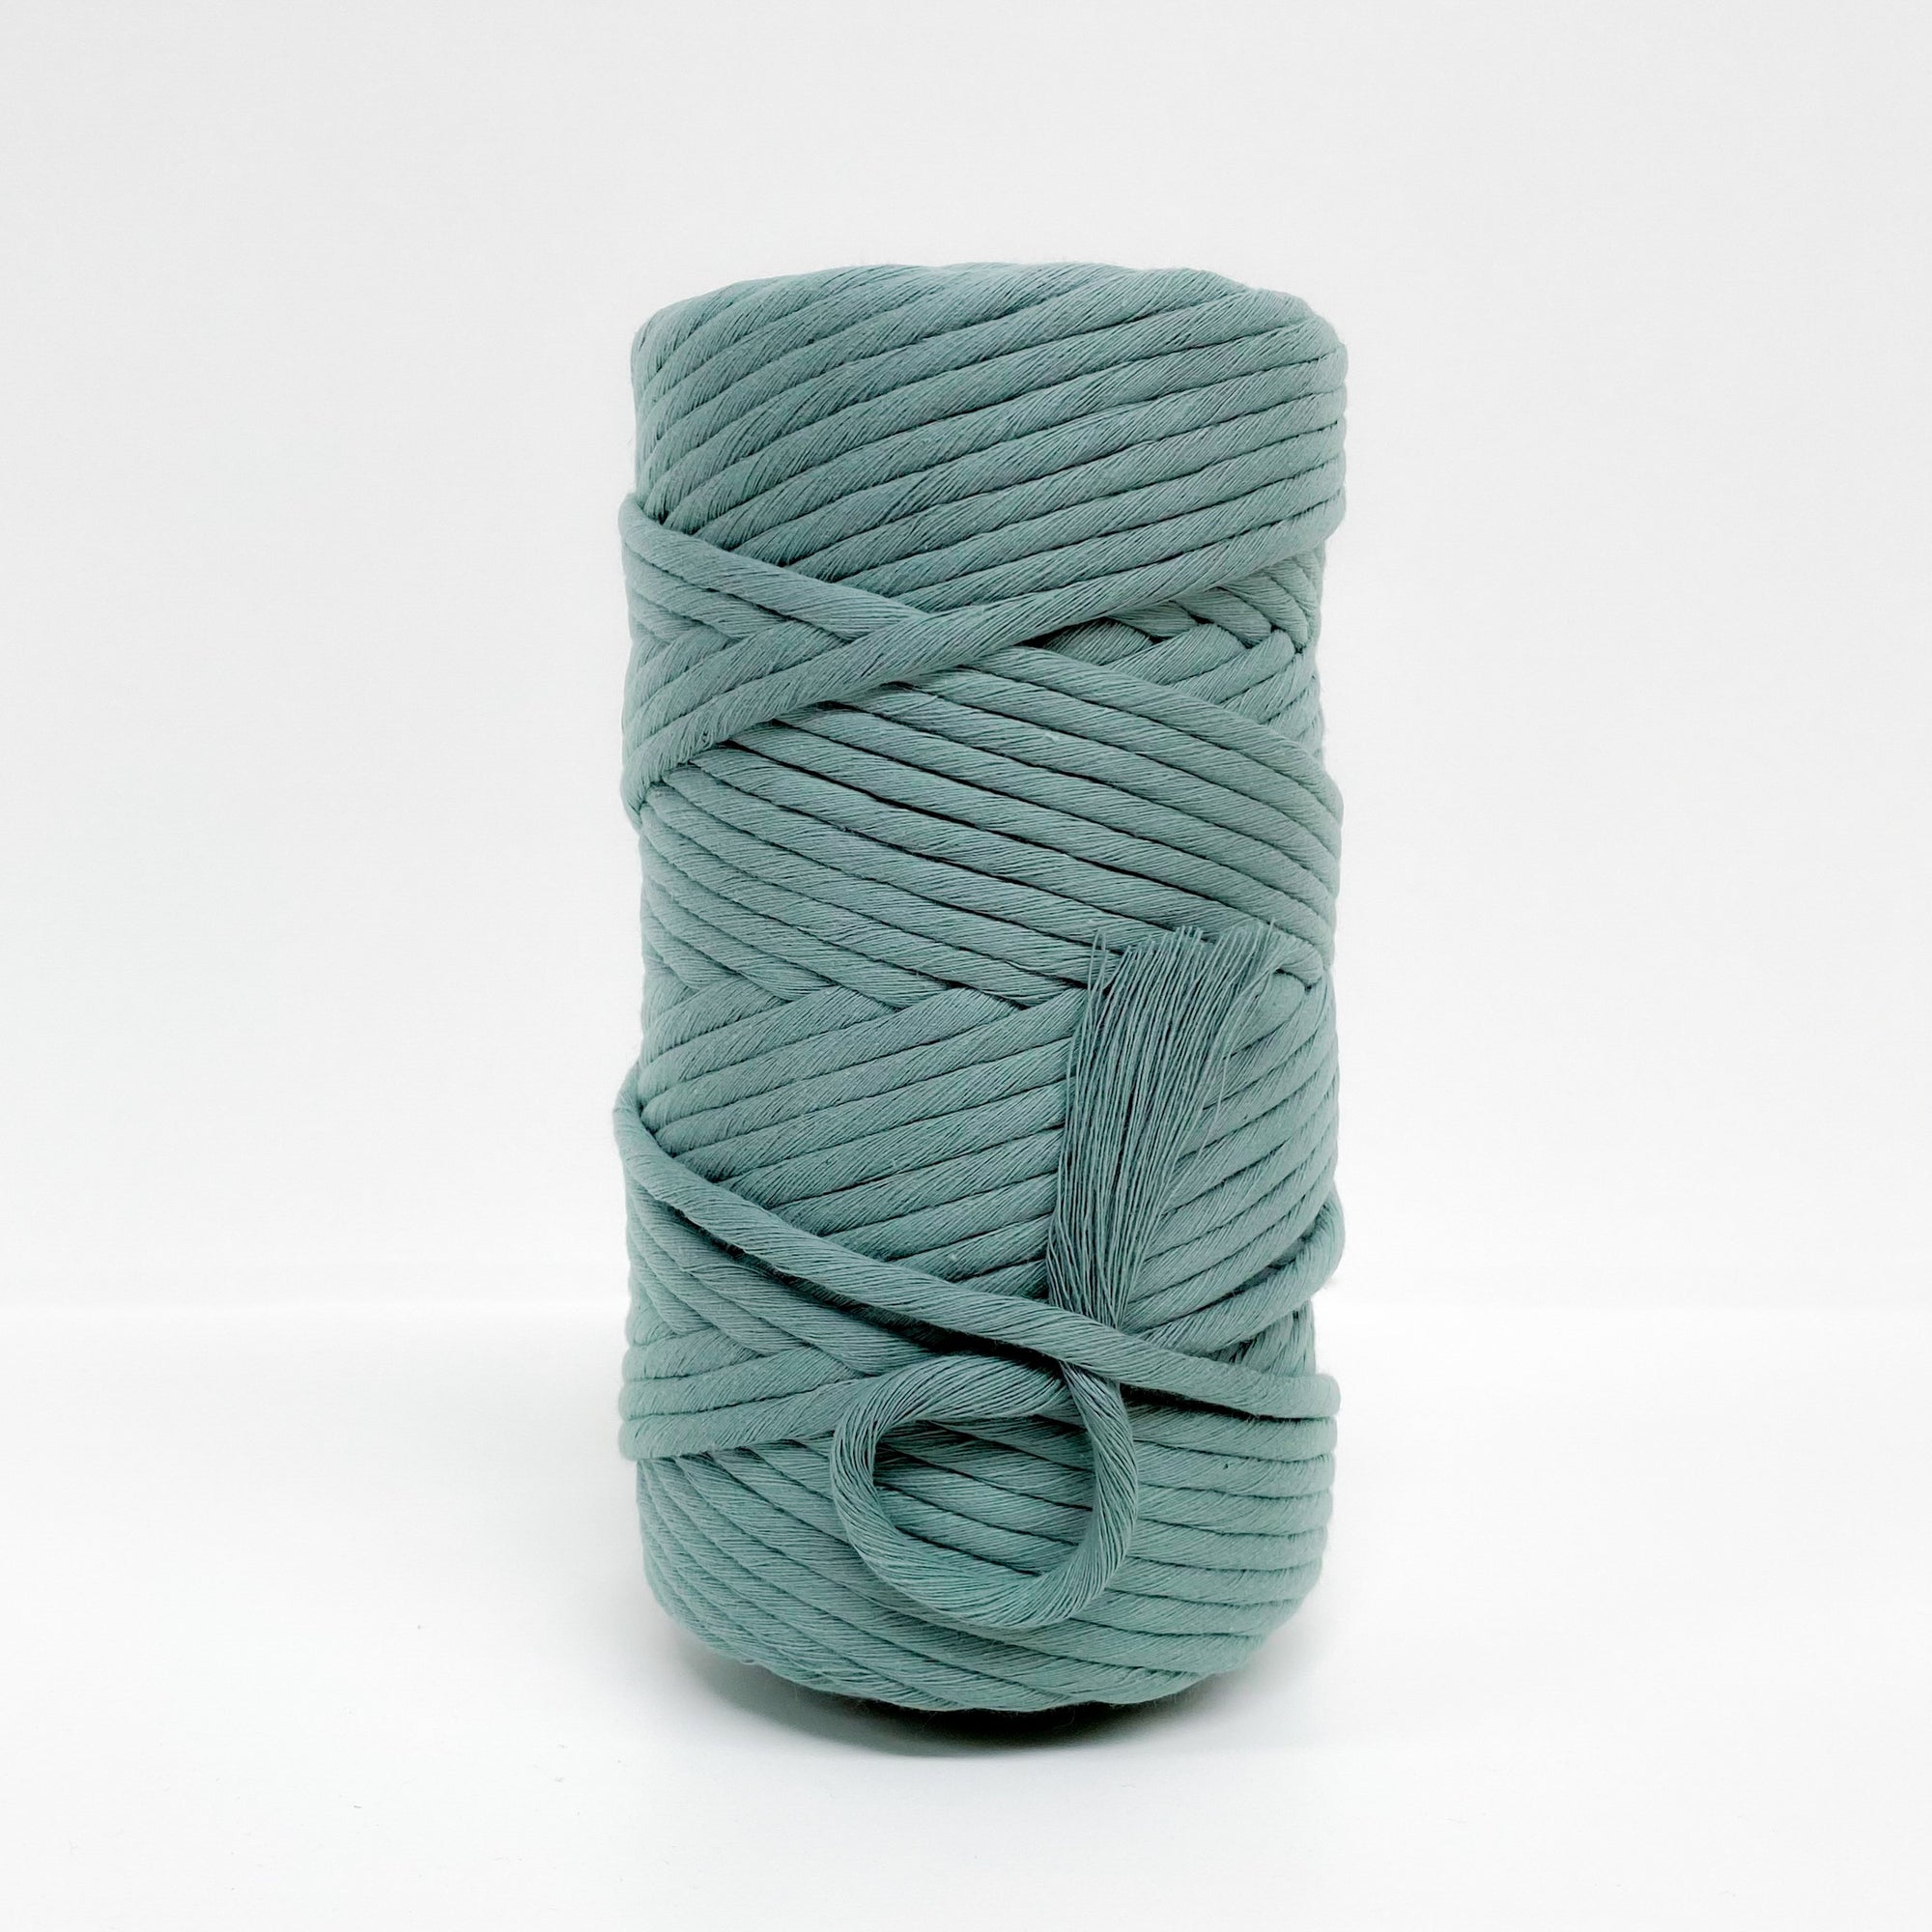 Mary Maker Studio Luxe Colour Cotton 8mm 1KG 8mm Recycled Luxe Macrame String // Vintage Teal macrame cotton macrame rope macrame workshop macrame patterns macrame